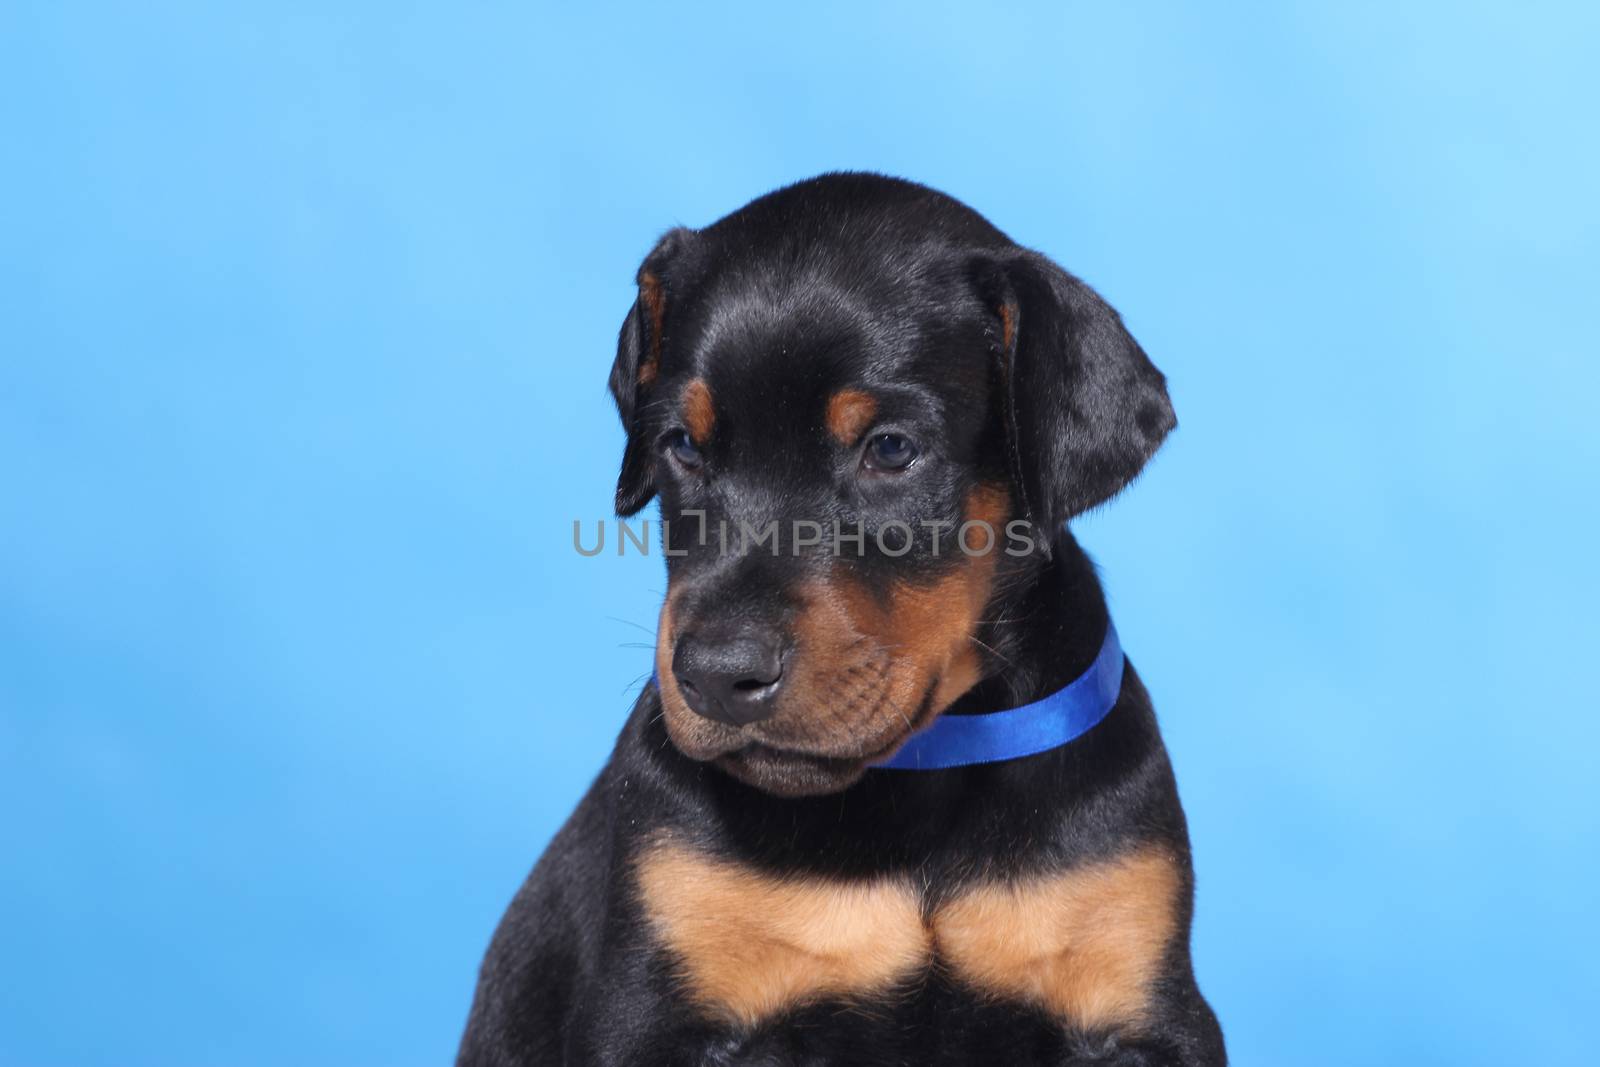 Portrait of Puppy with blue belt  on blue background